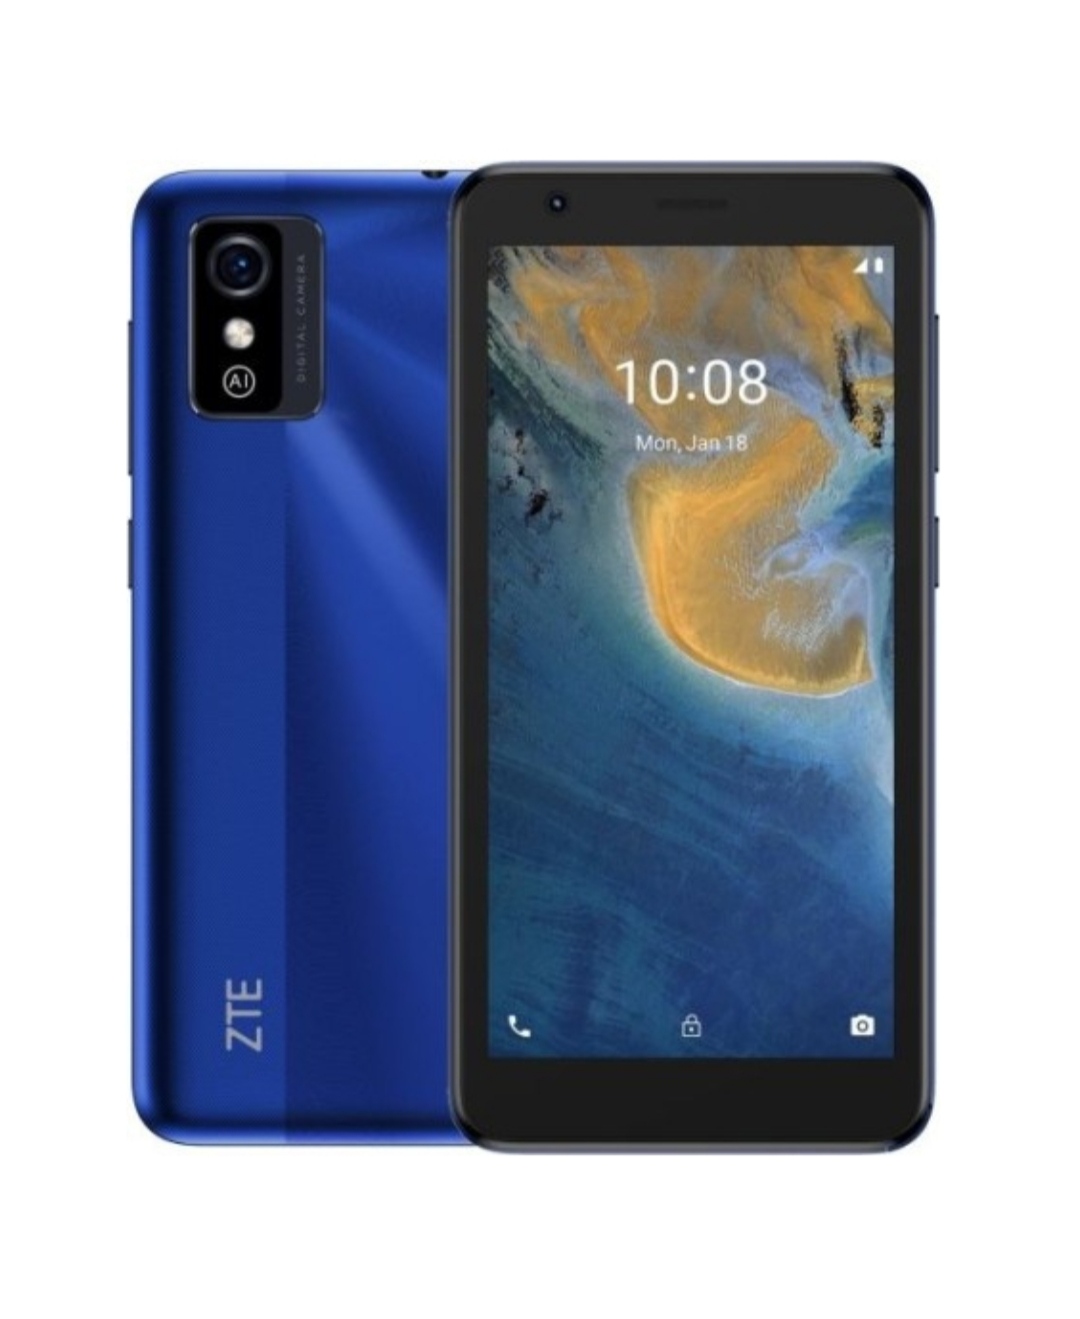 ZTE Blade L9 Smartphone | See Specs and Features